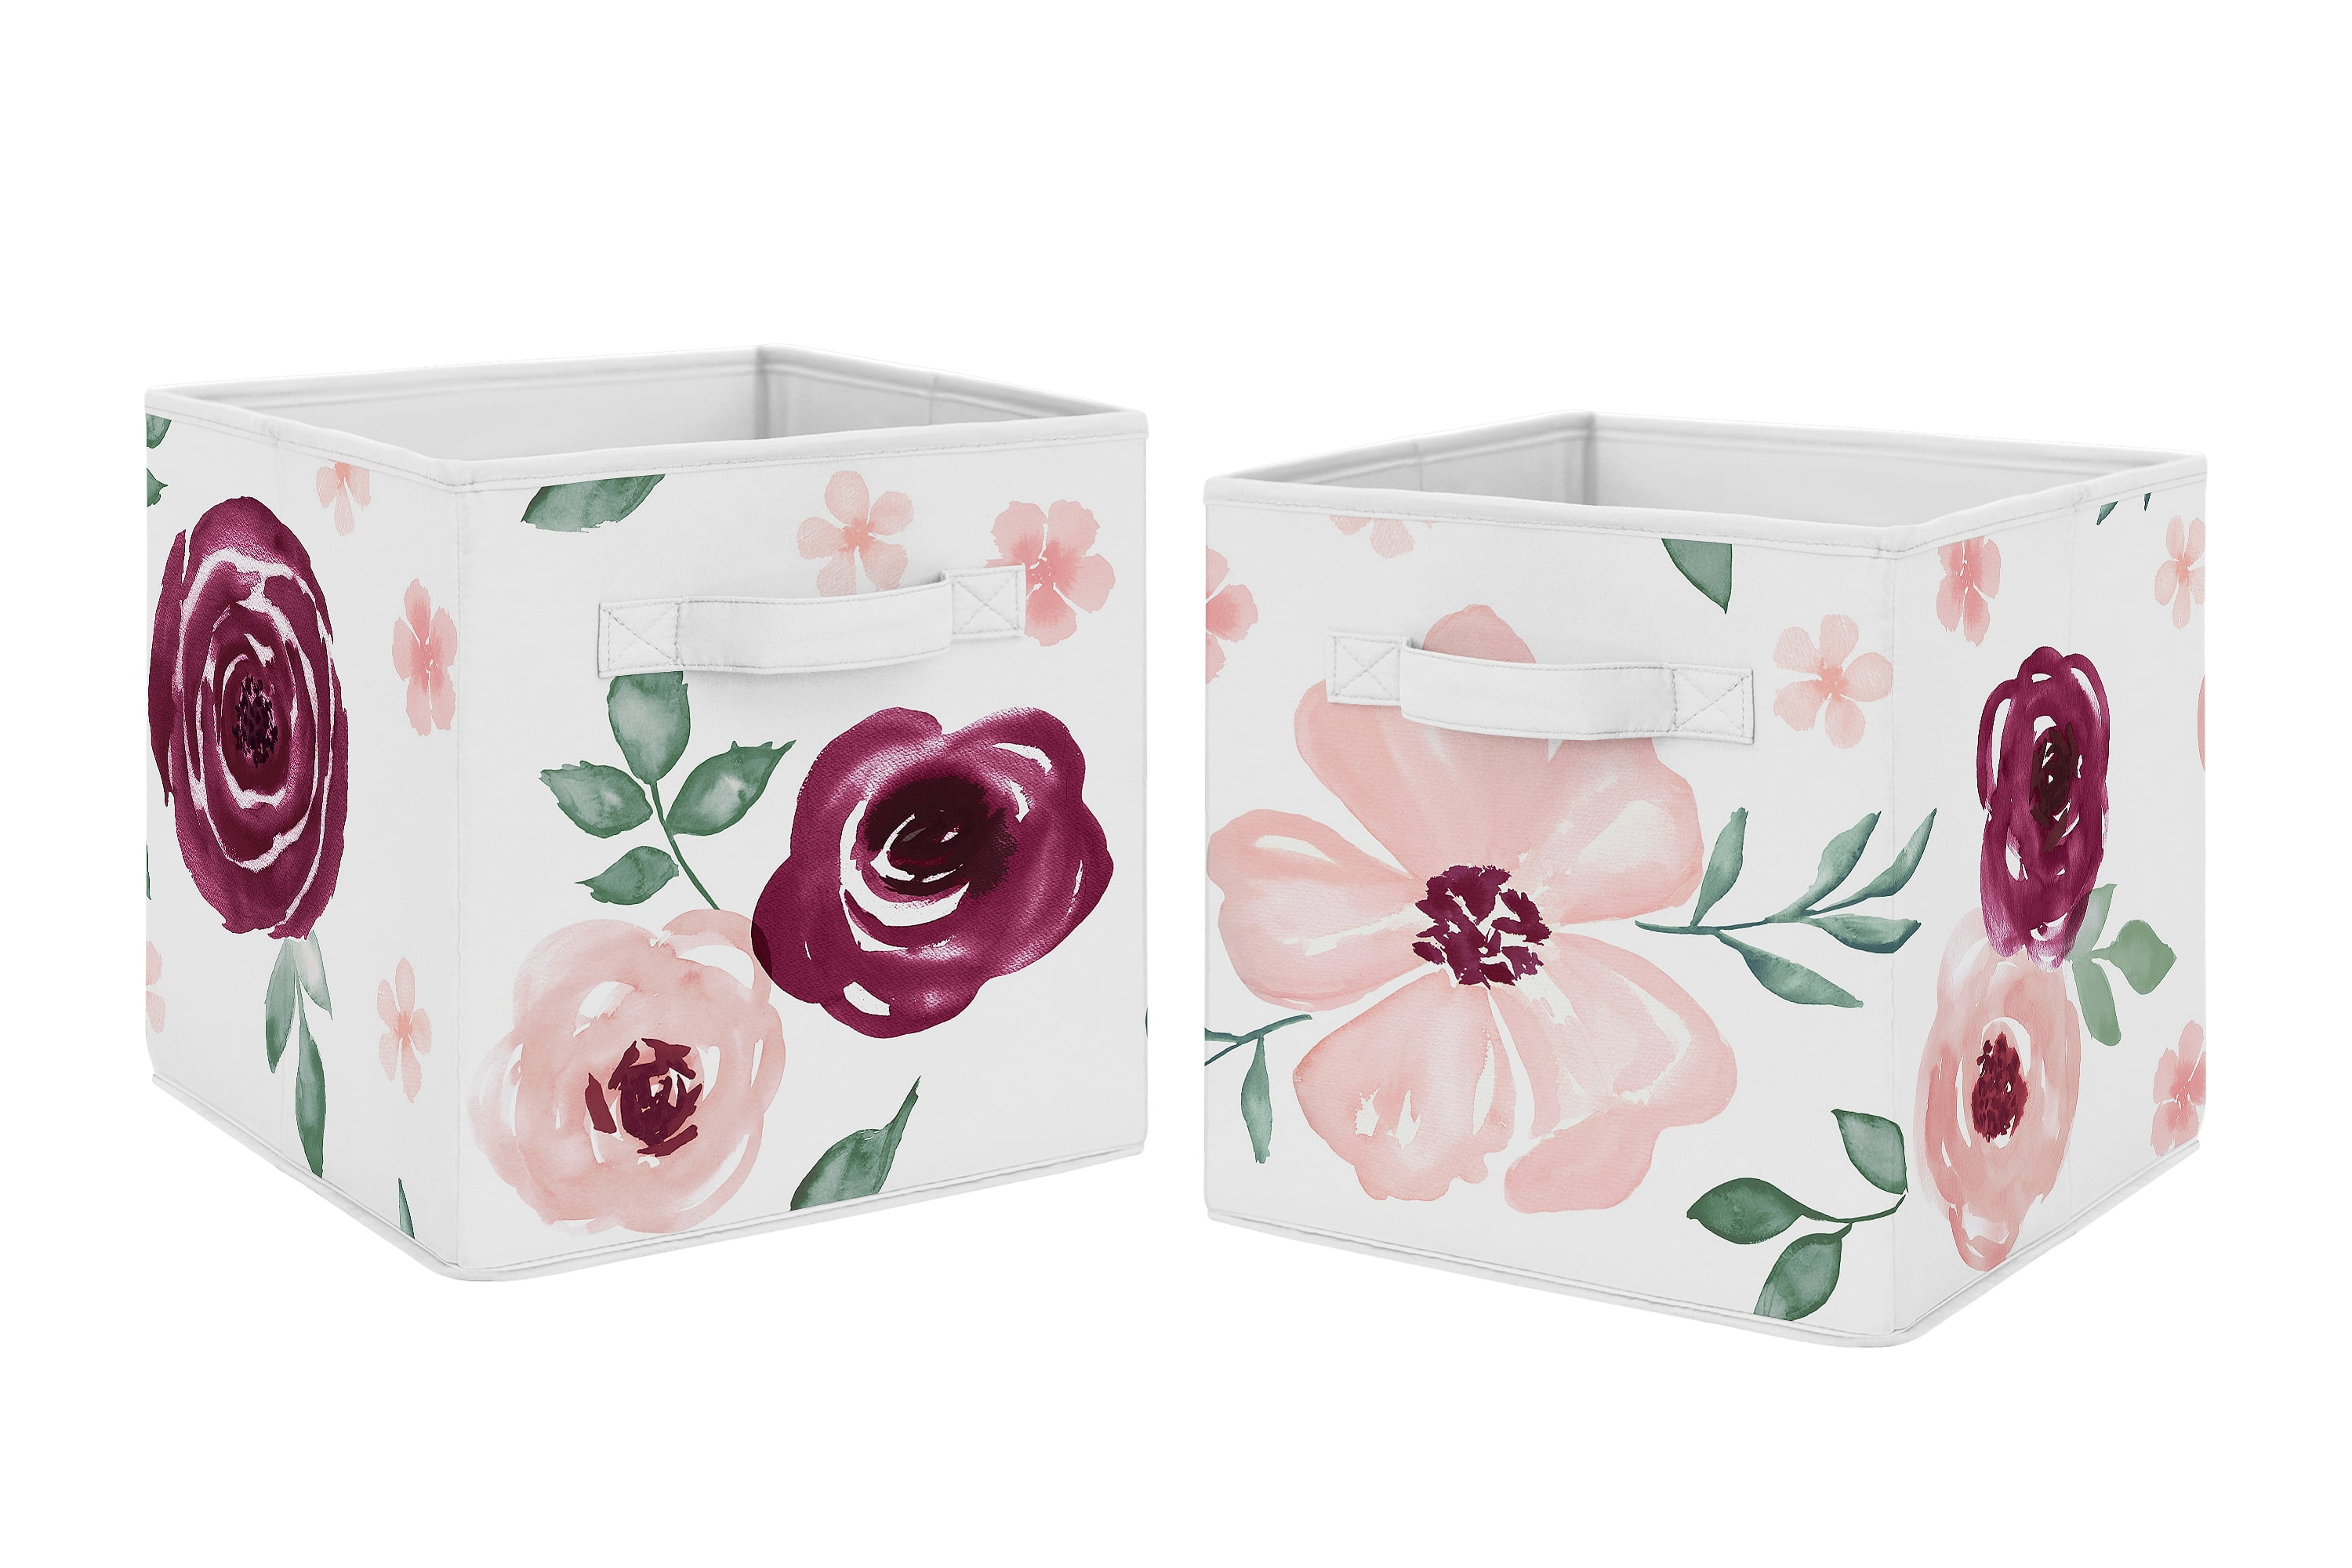 Peach Green Watercolor Floral Rose Flower Girl Fabric Toy Bin Storage Box Chest 